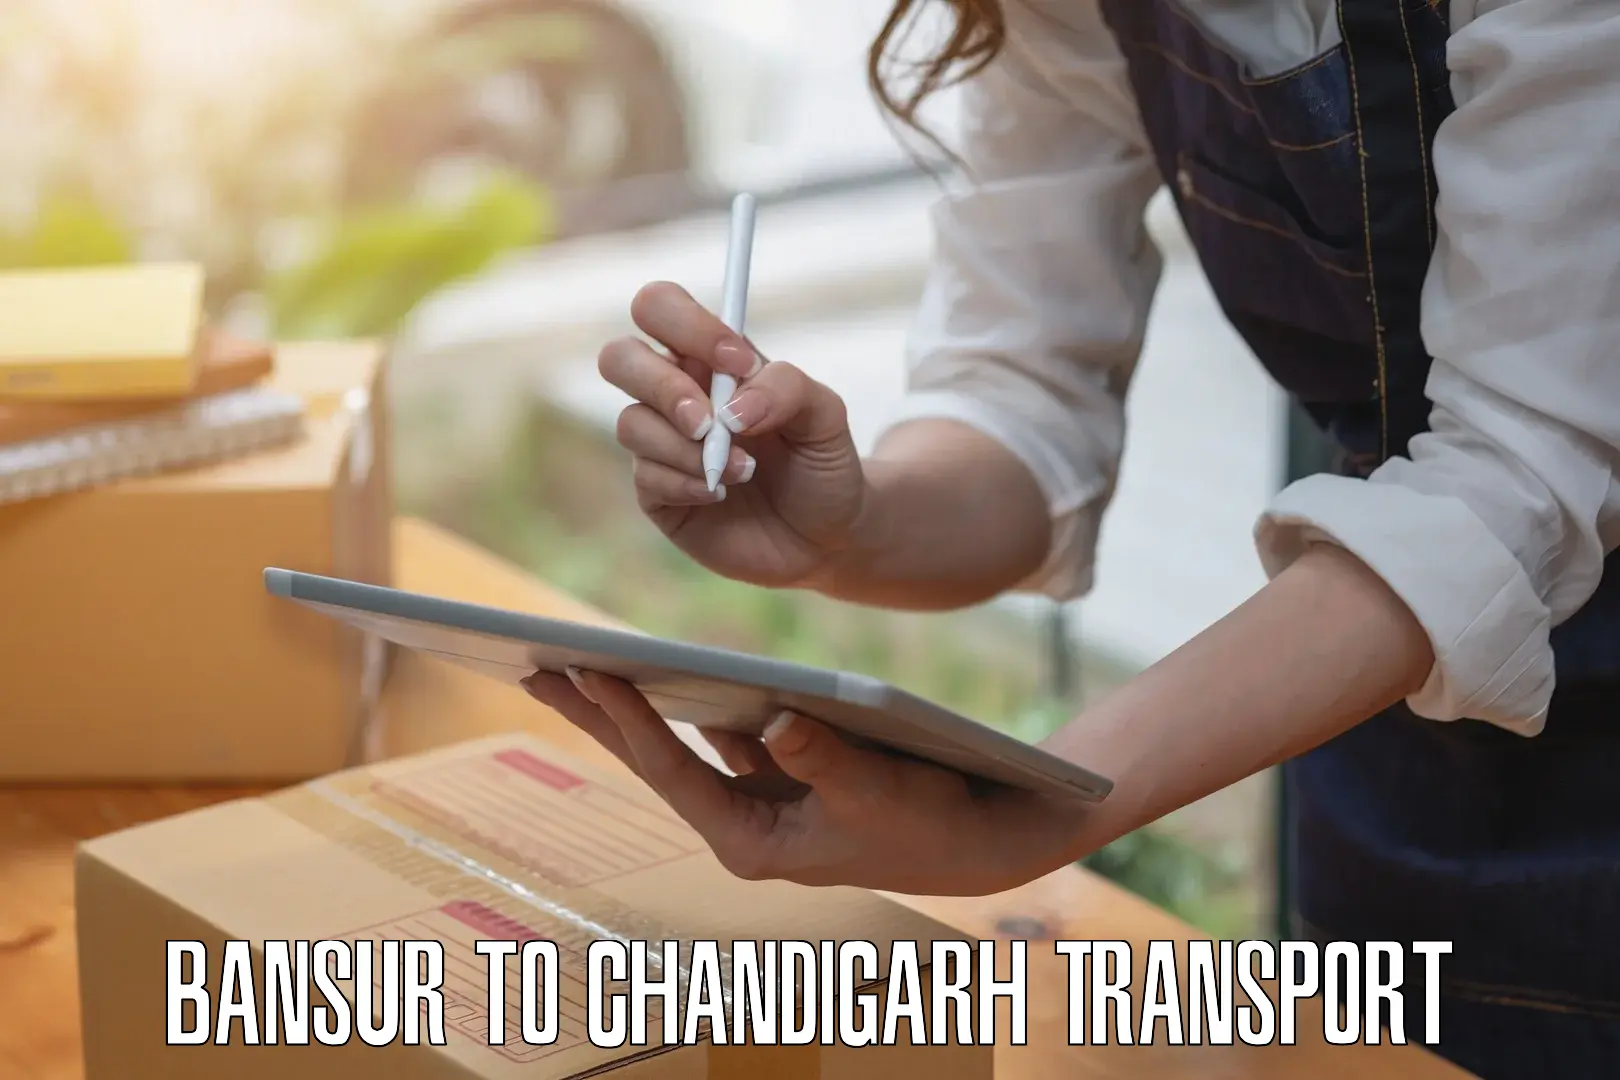 Transport bike from one state to another Bansur to Chandigarh